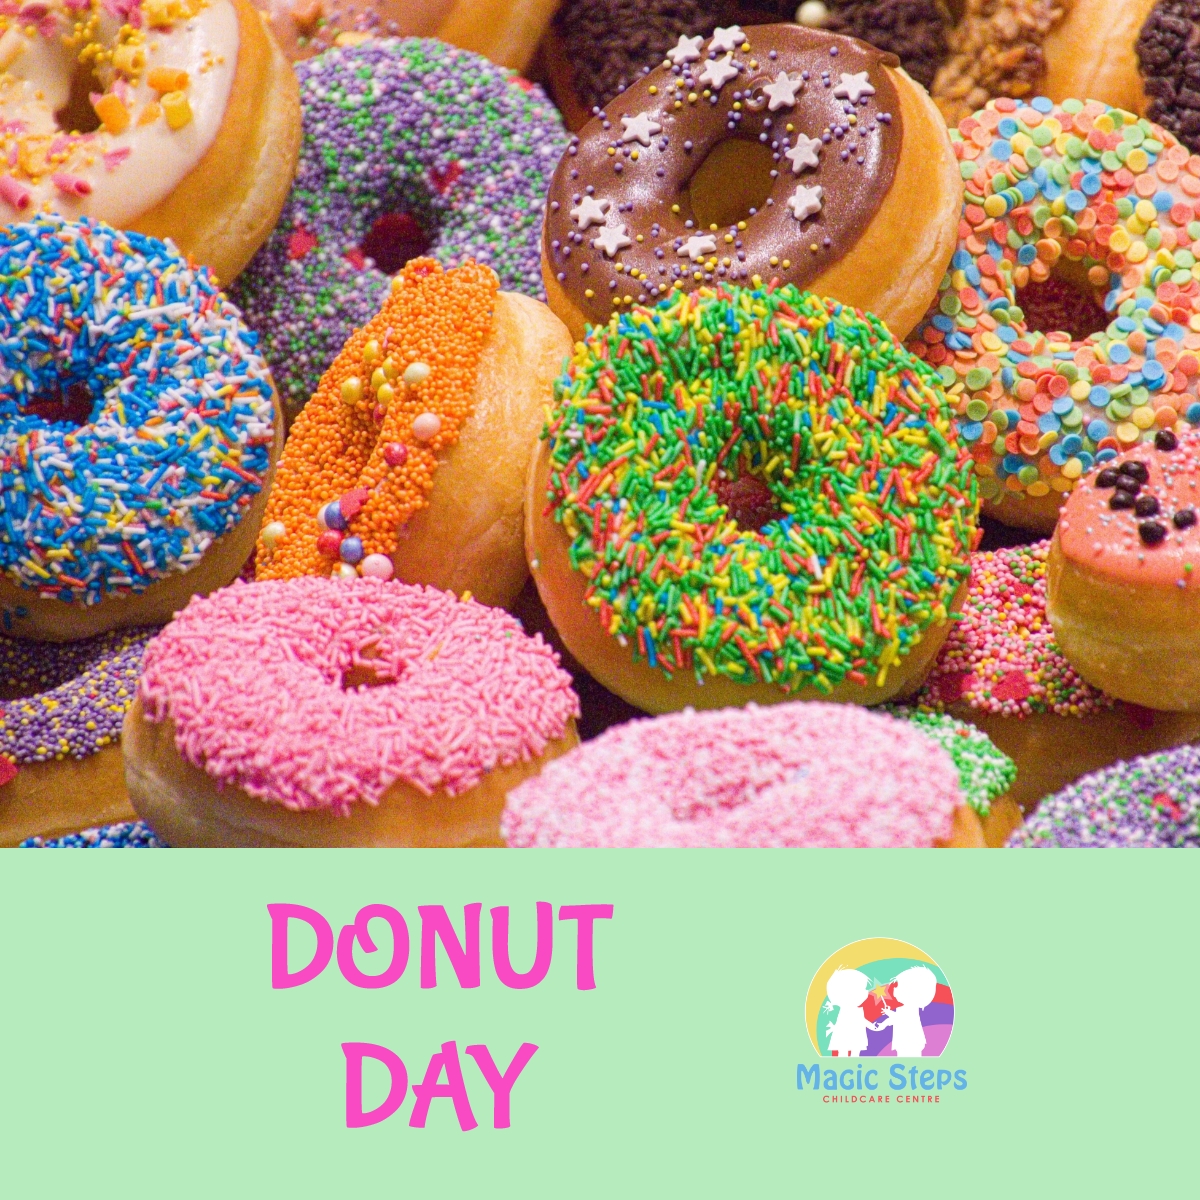 Donut Day- Wednesday 2nd June